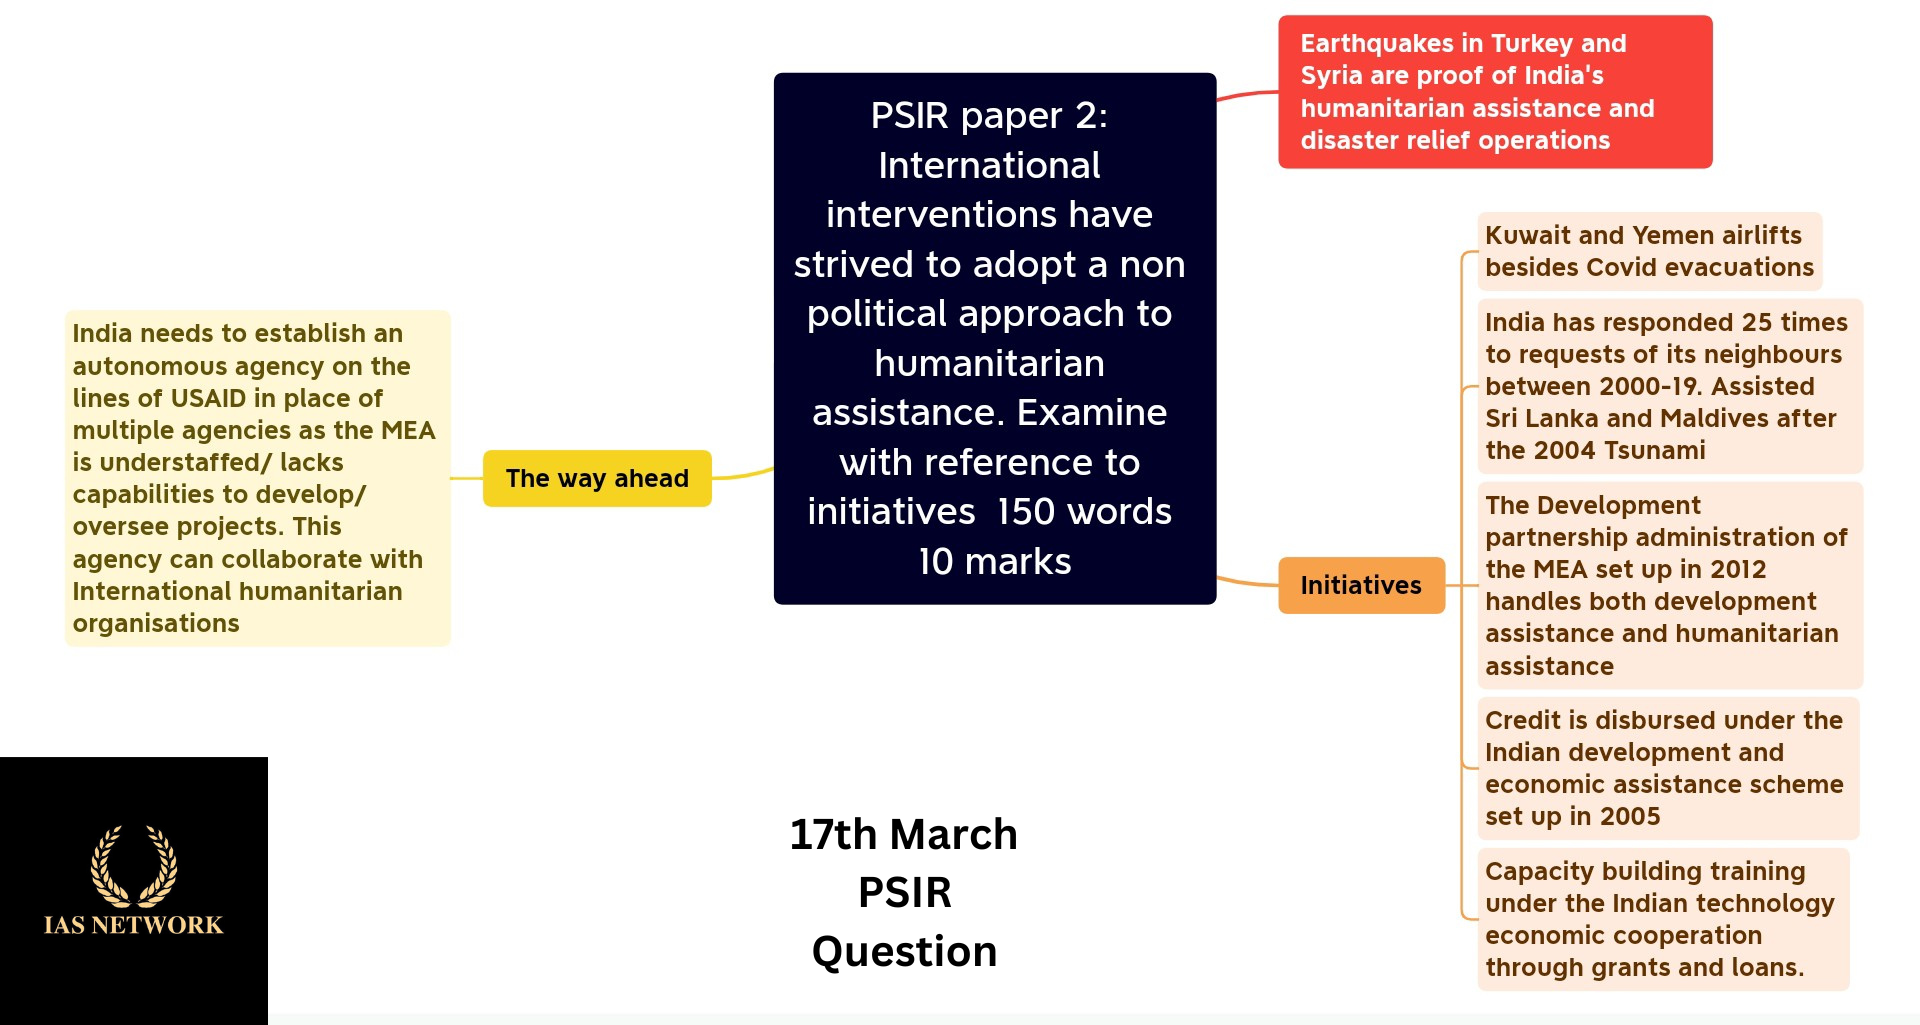 IAS NETWORK 17th MARCH PSIR QUESTION